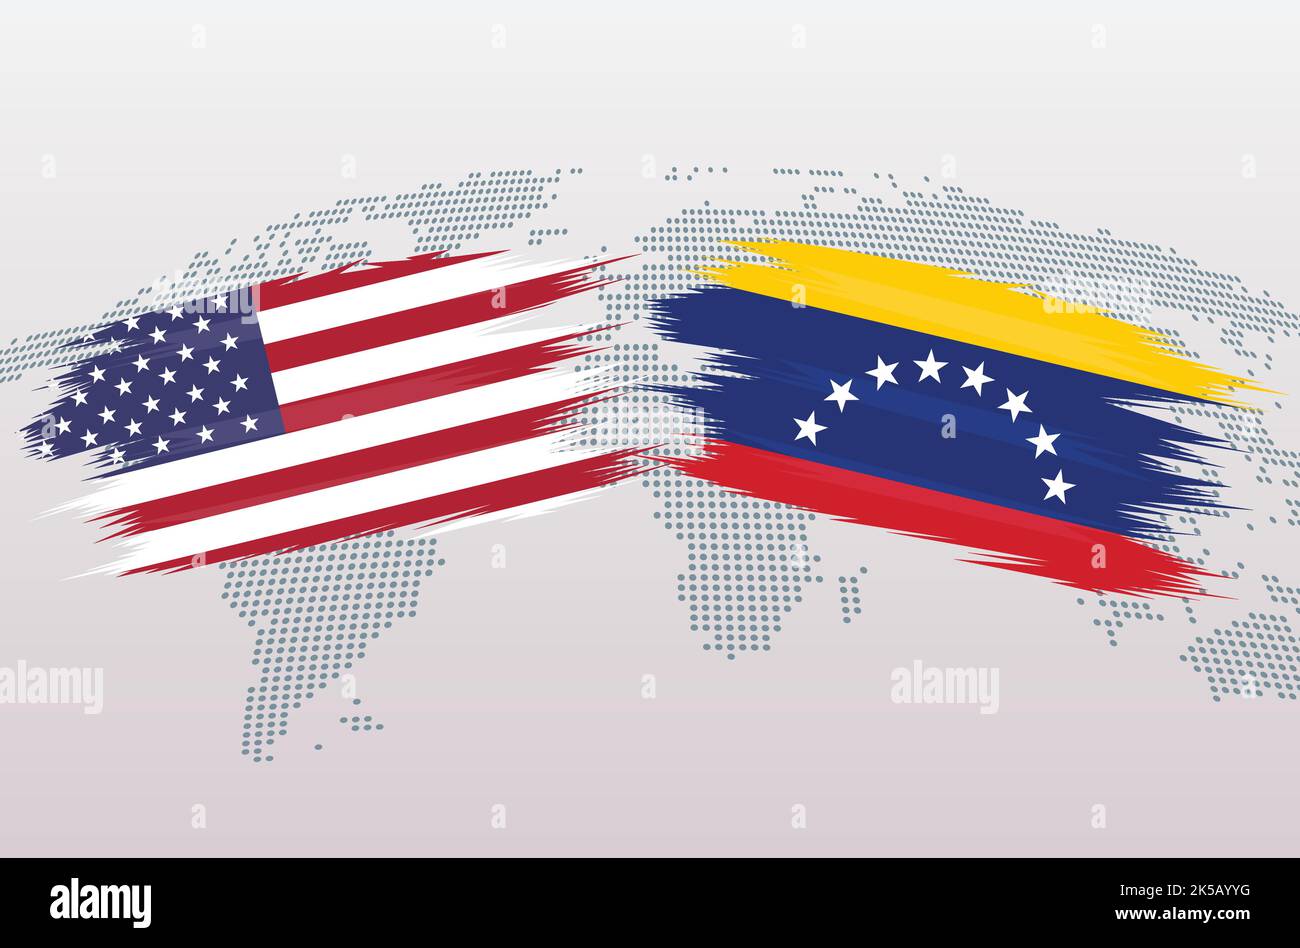 USA VS Venezuela flags. The United States of America VS Venezuela flags, isolated on grey world map background. Vector illustration. Stock Vector